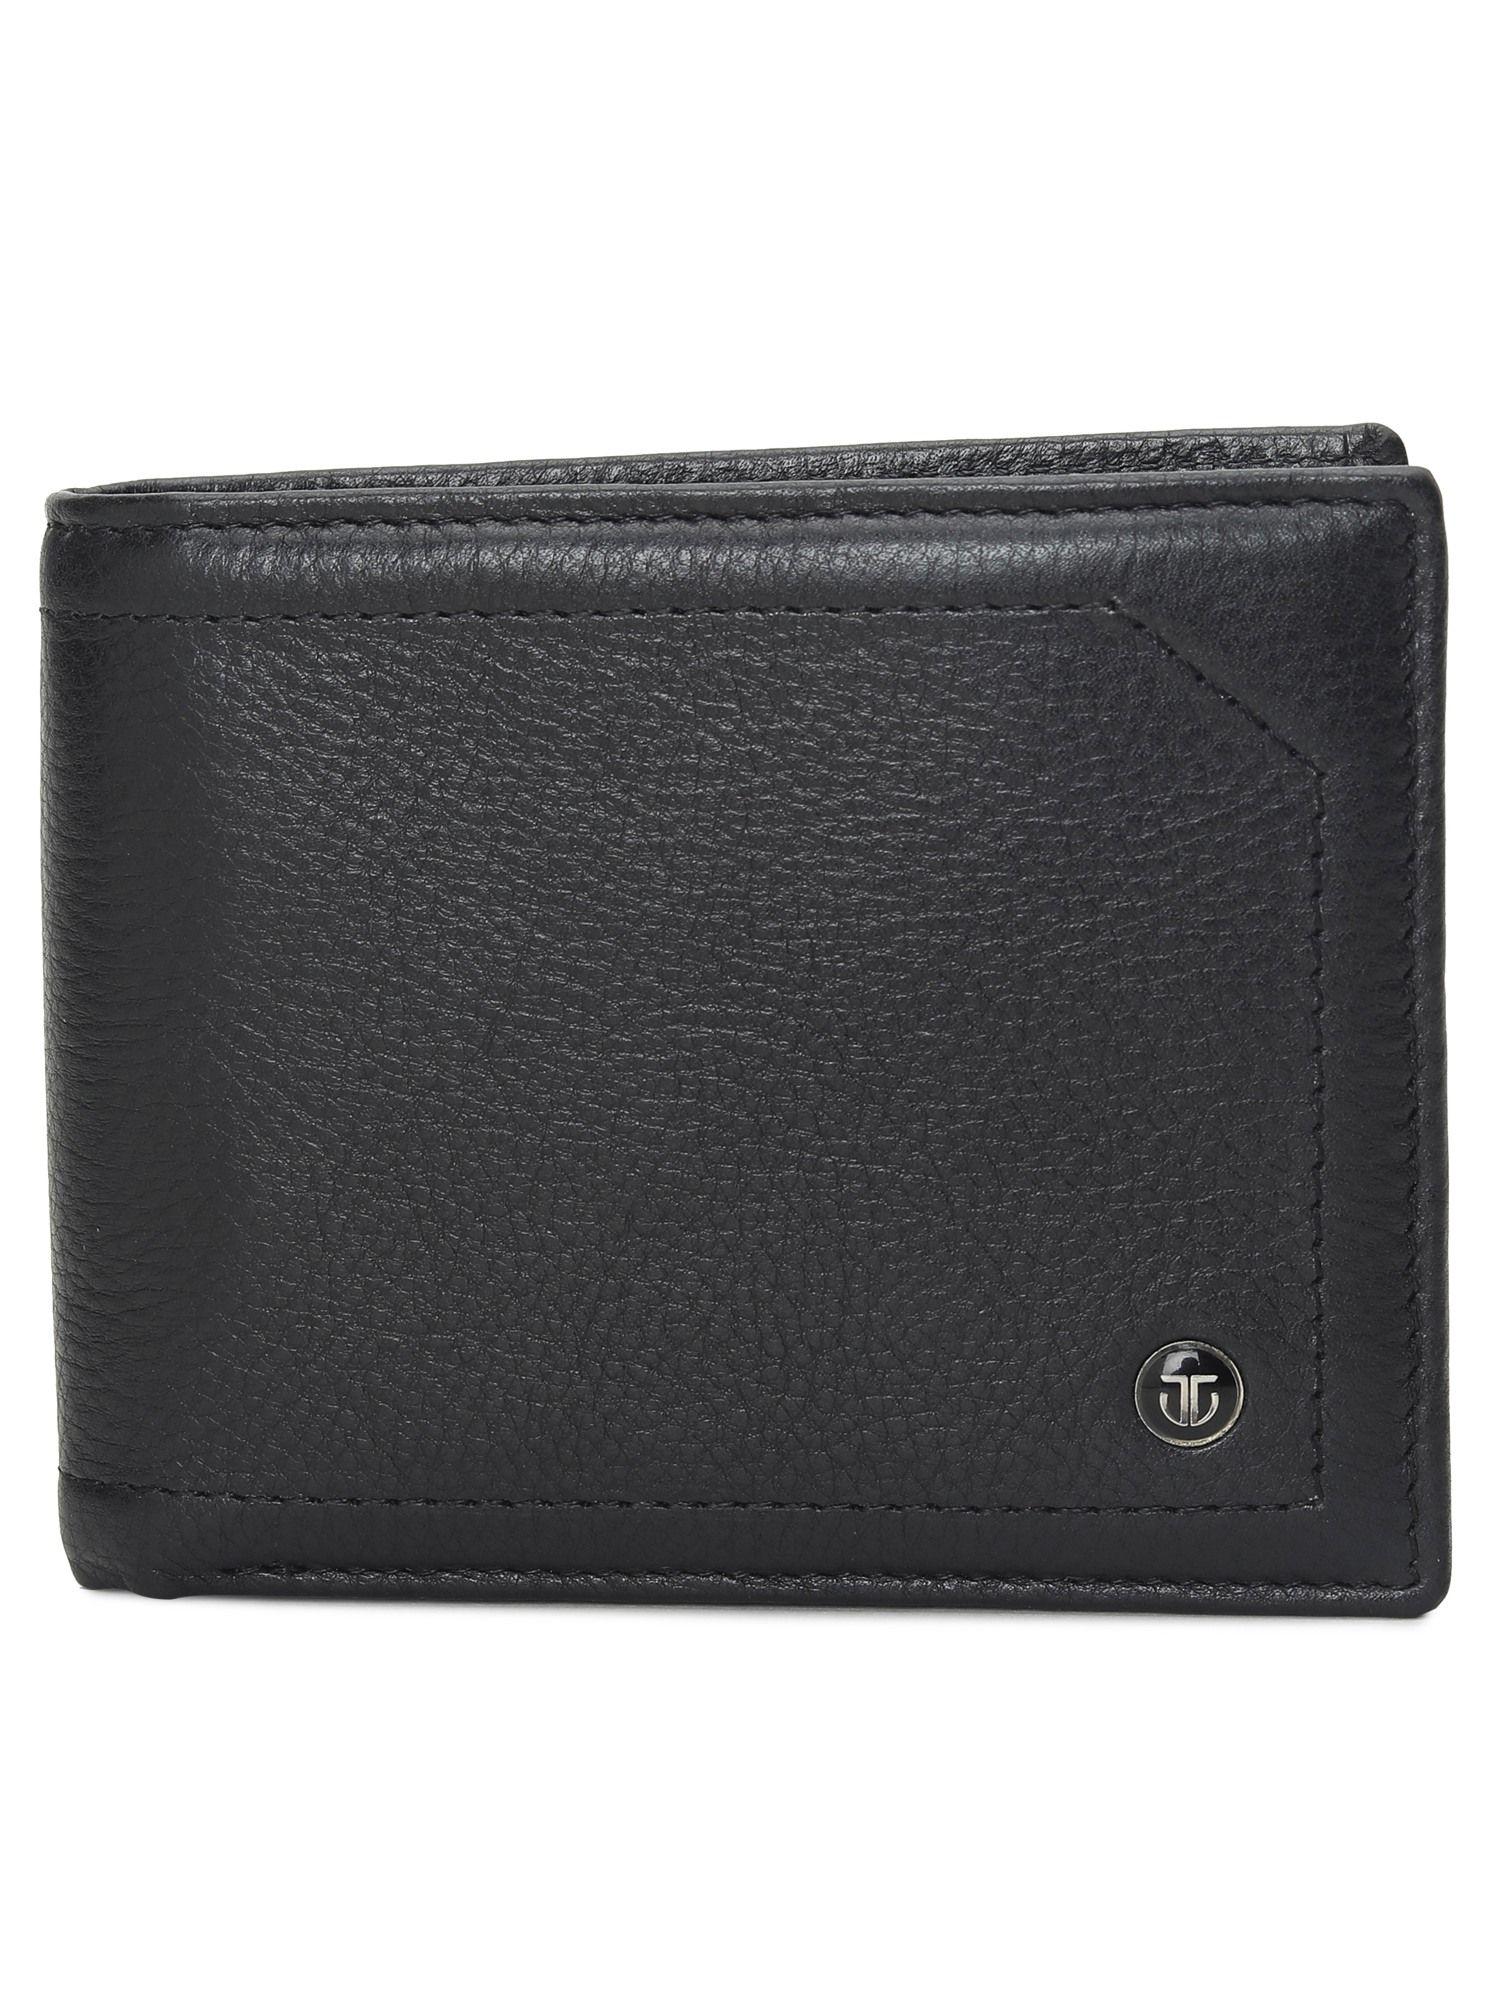 solid leather bifold wallet in color black